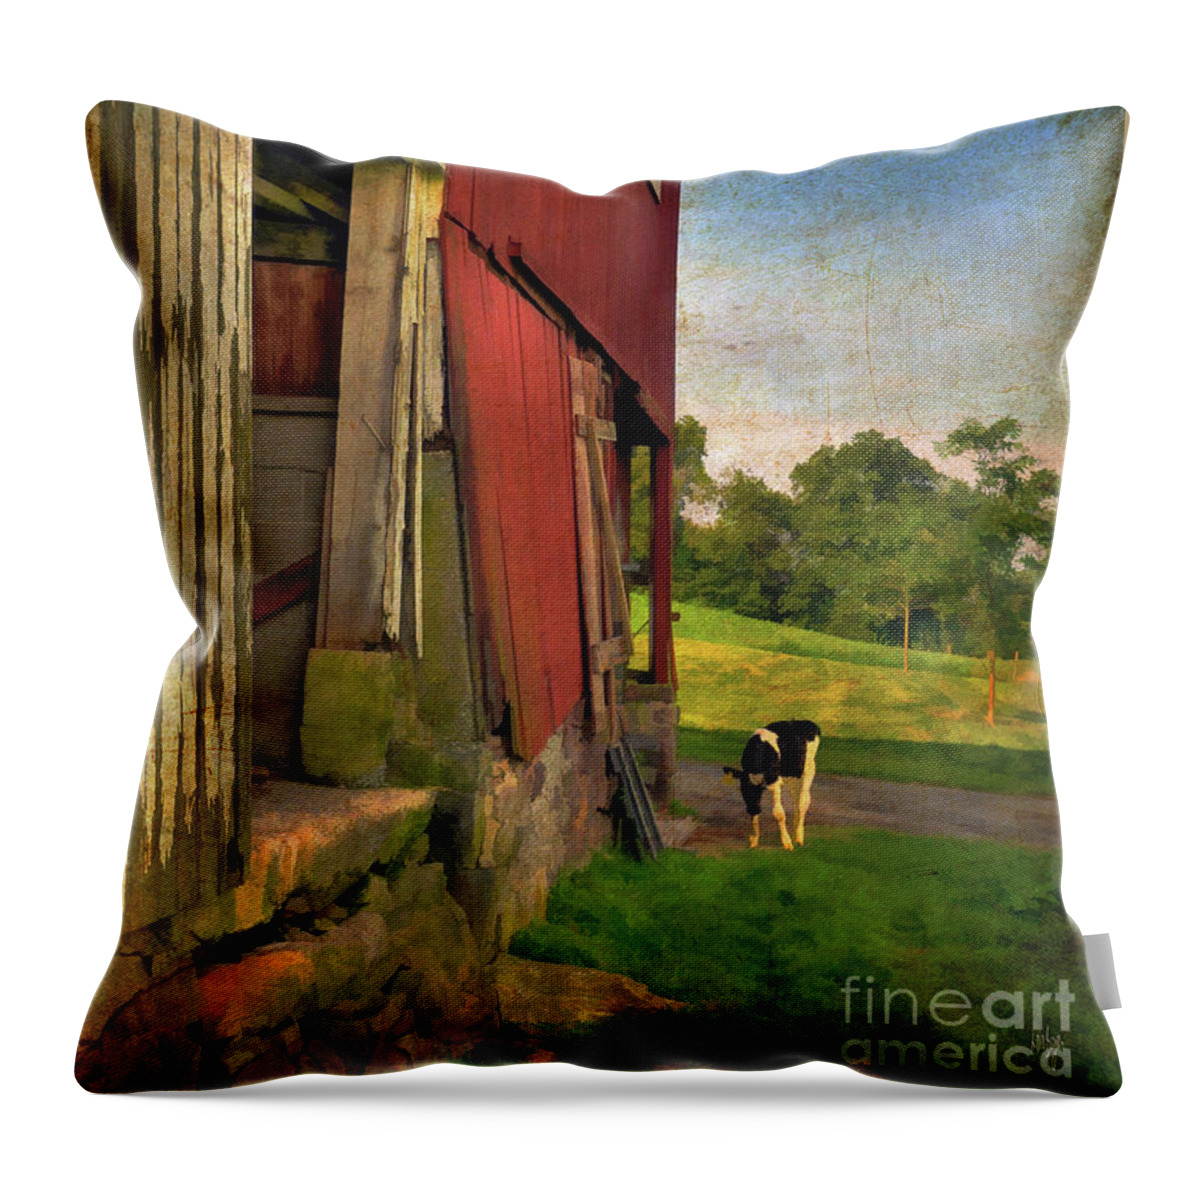 Animals Throw Pillow featuring the photograph Free Range by Lois Bryan